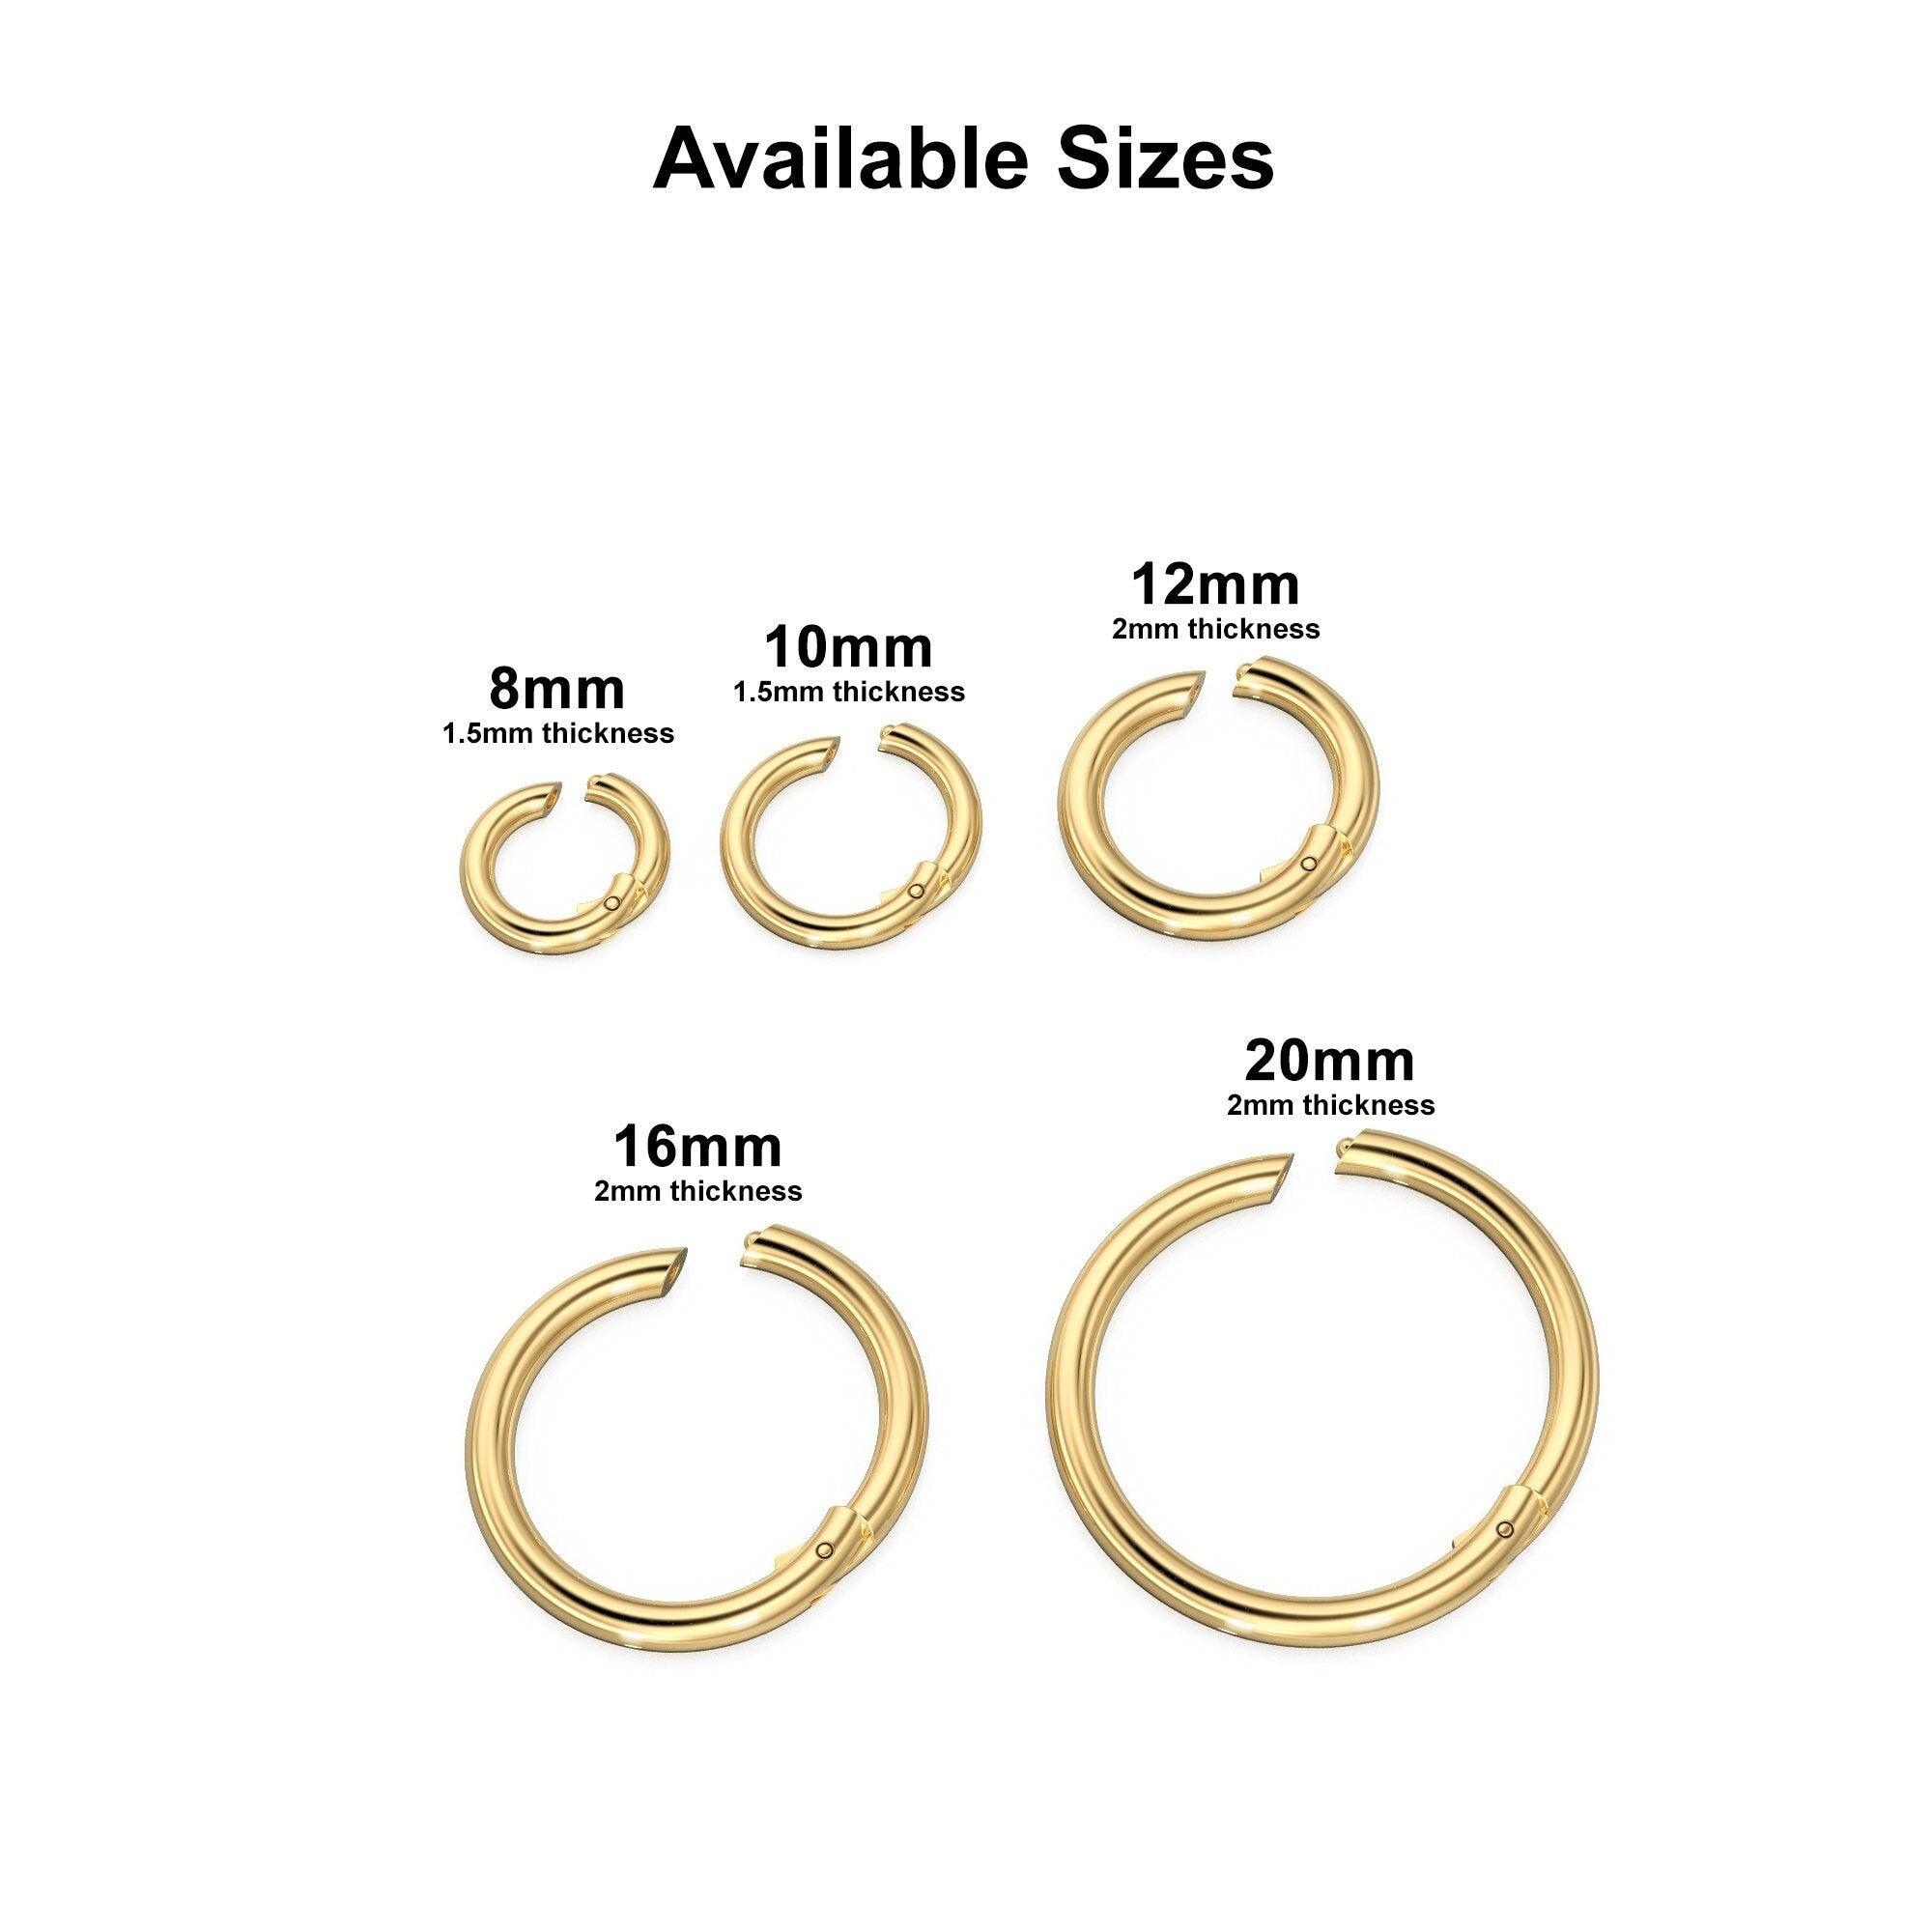 18k / 14k Gold Charm Connector, Works as bail, Necklace Chain Connector,  DIY Findings, Jewelry Component, Price Per Piece